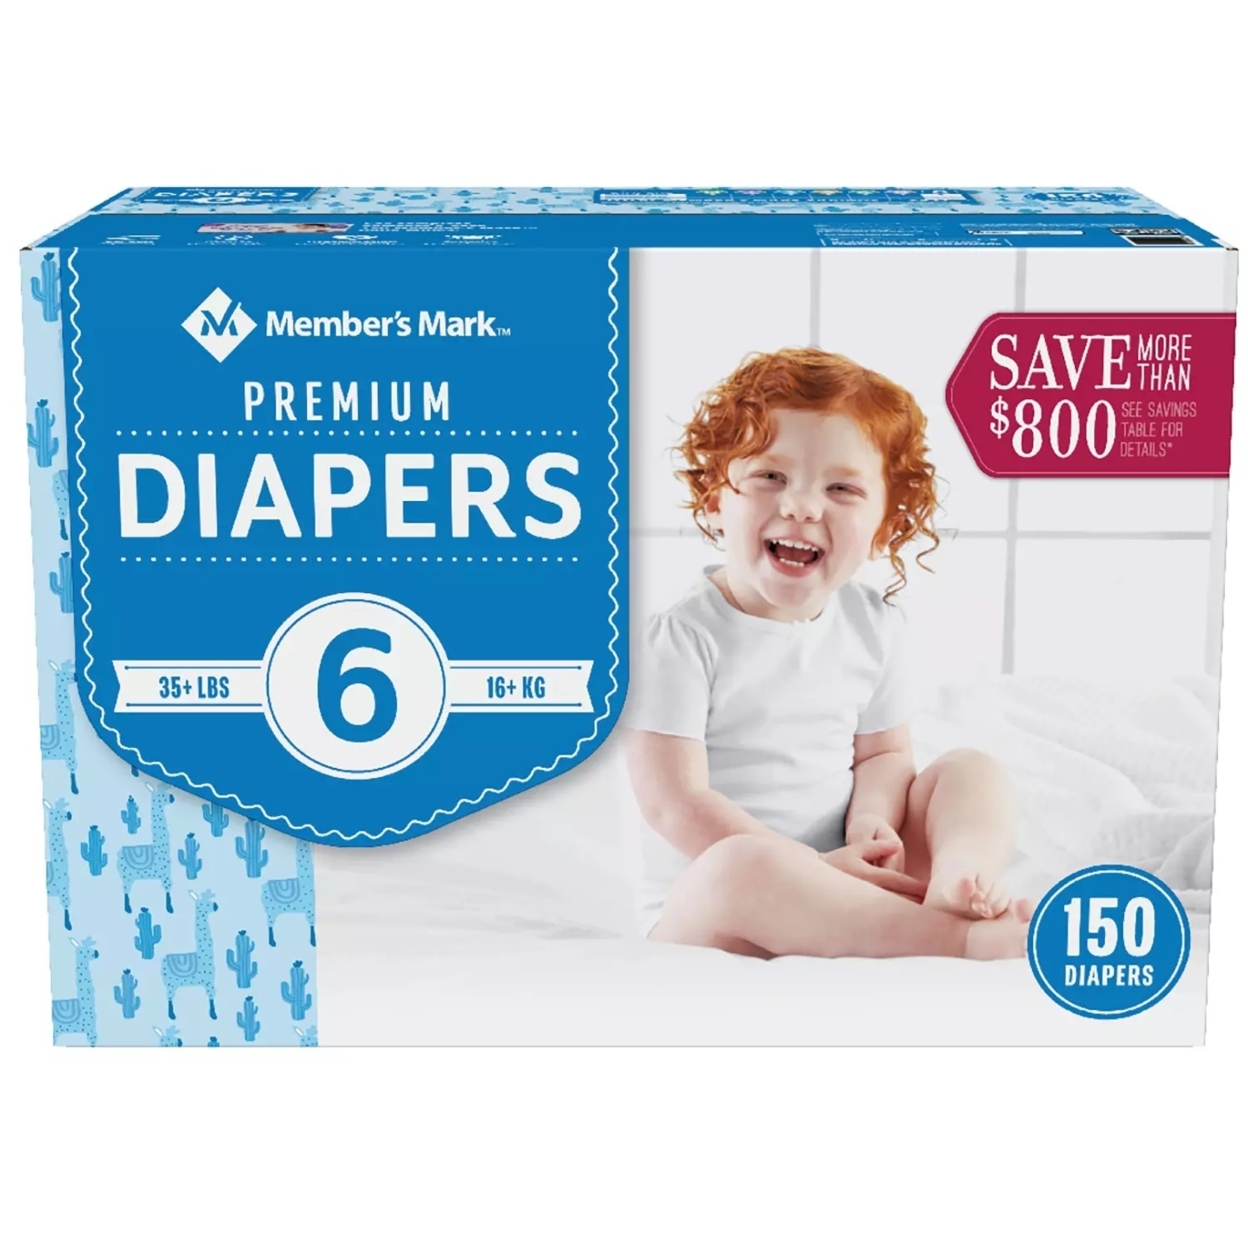 Member's Mark Premium Baby Diapers, Size 6 (35+ Pounds), 150 Count